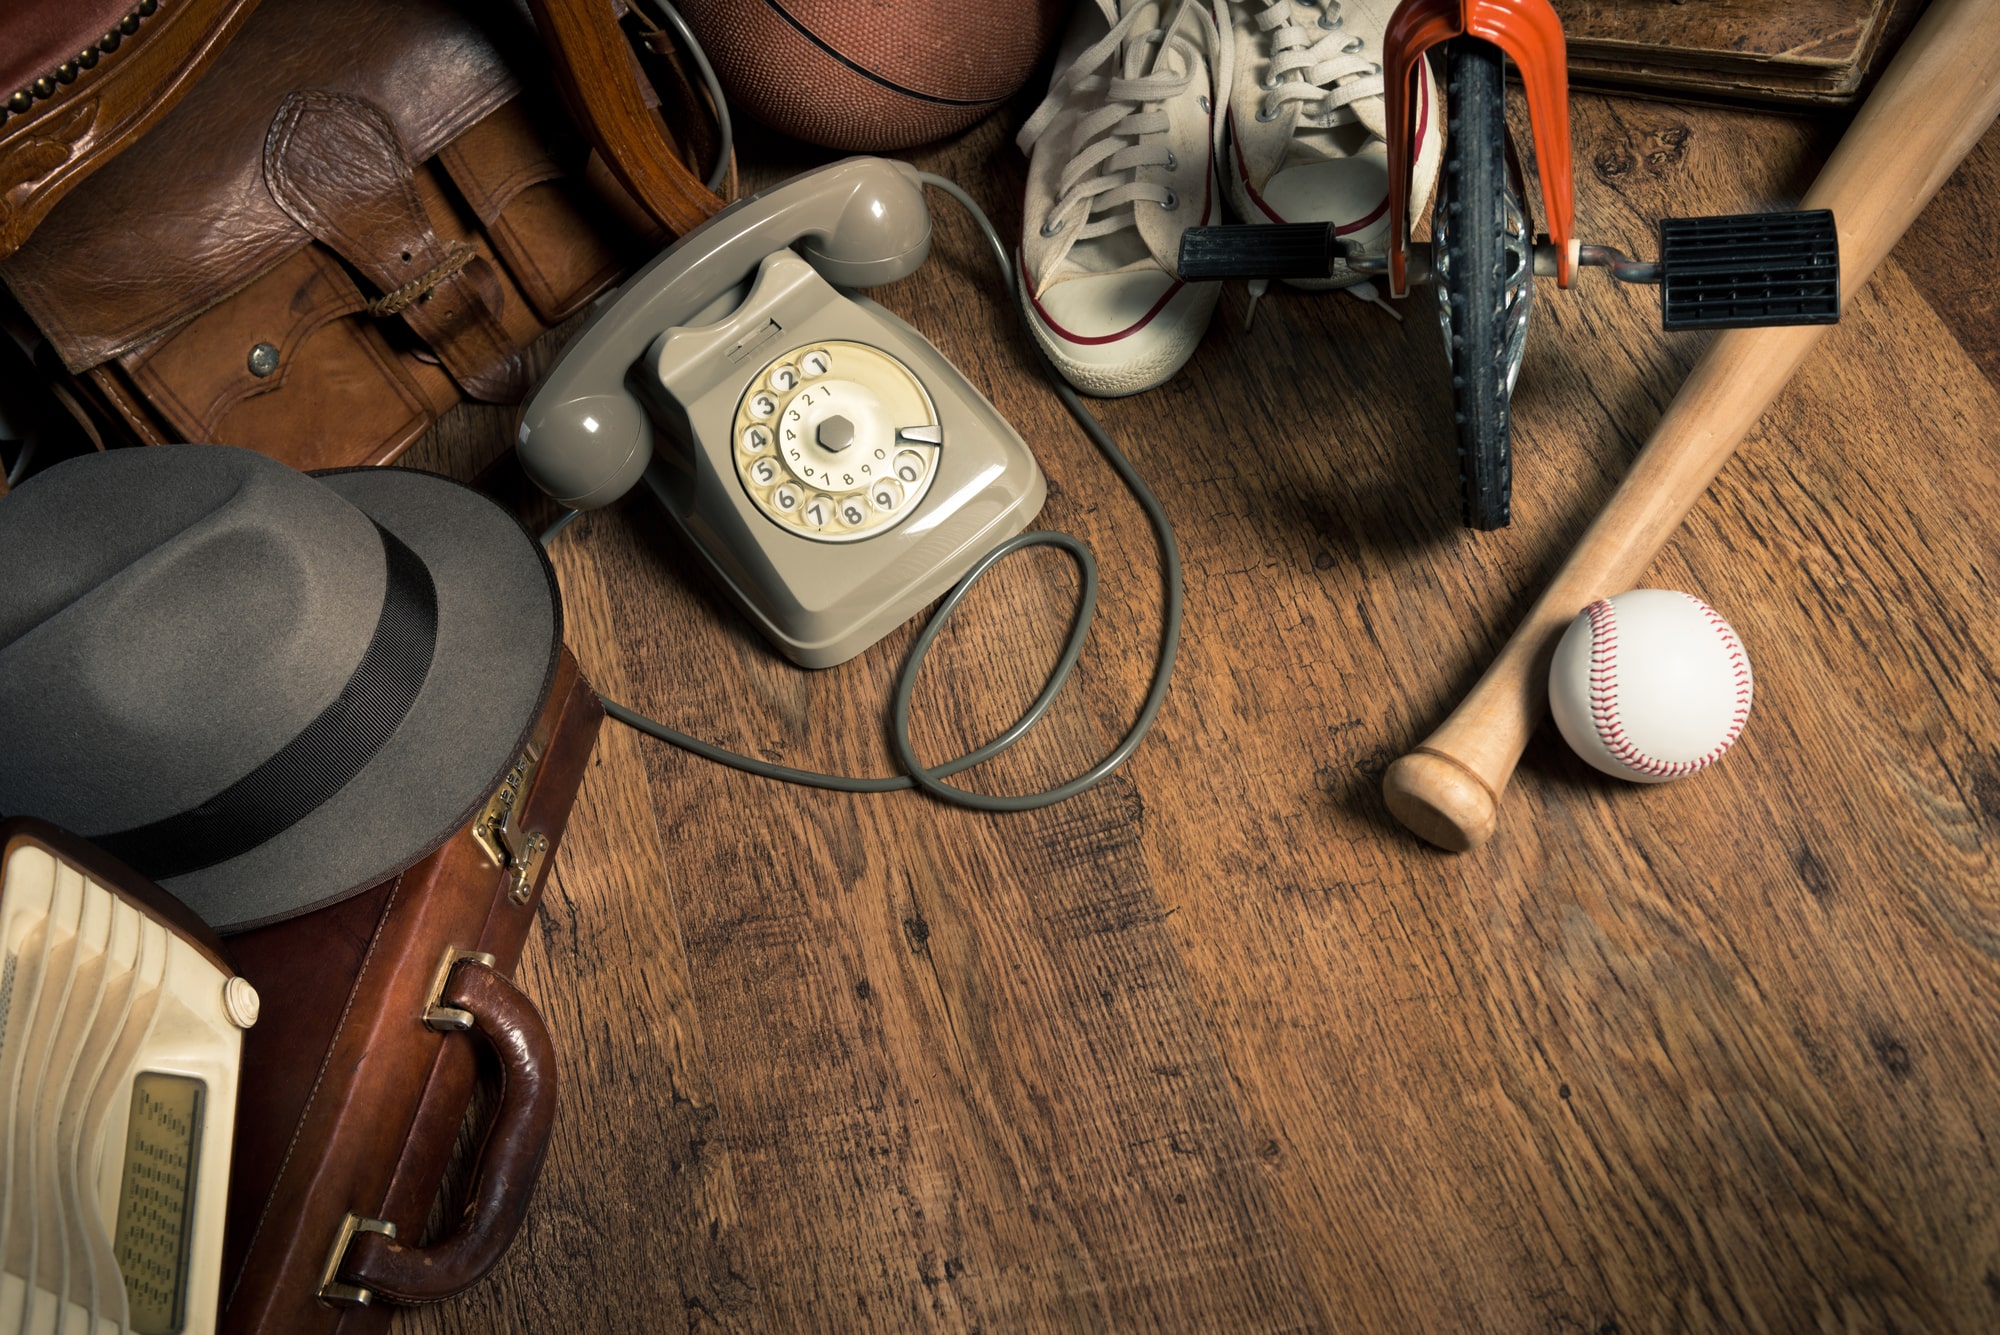  An old hat, telephone, suitcase, and bat and ball make up just some of the items cluttering an attic.